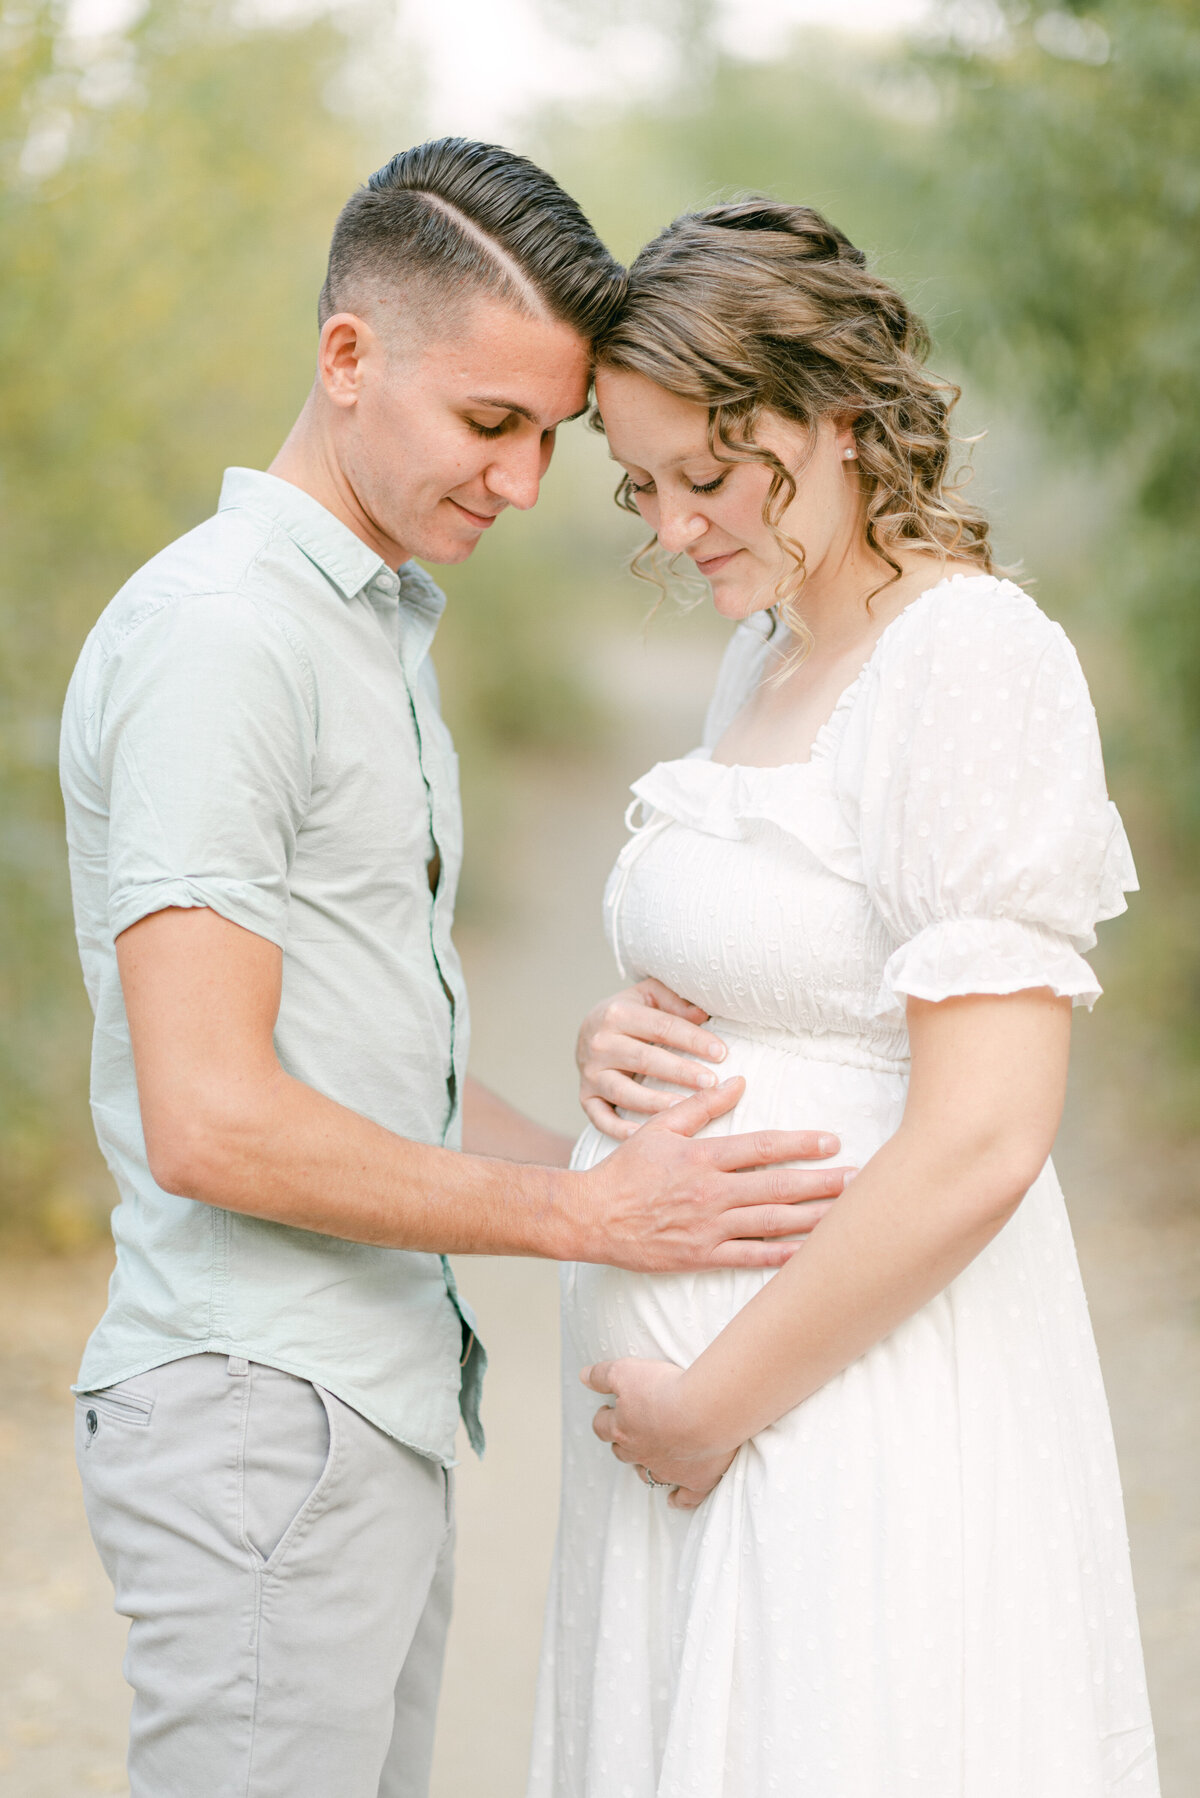 Portrait of a man and a pregnant woman outdoors leaning into each other looking down with their hands placed on her stomach.